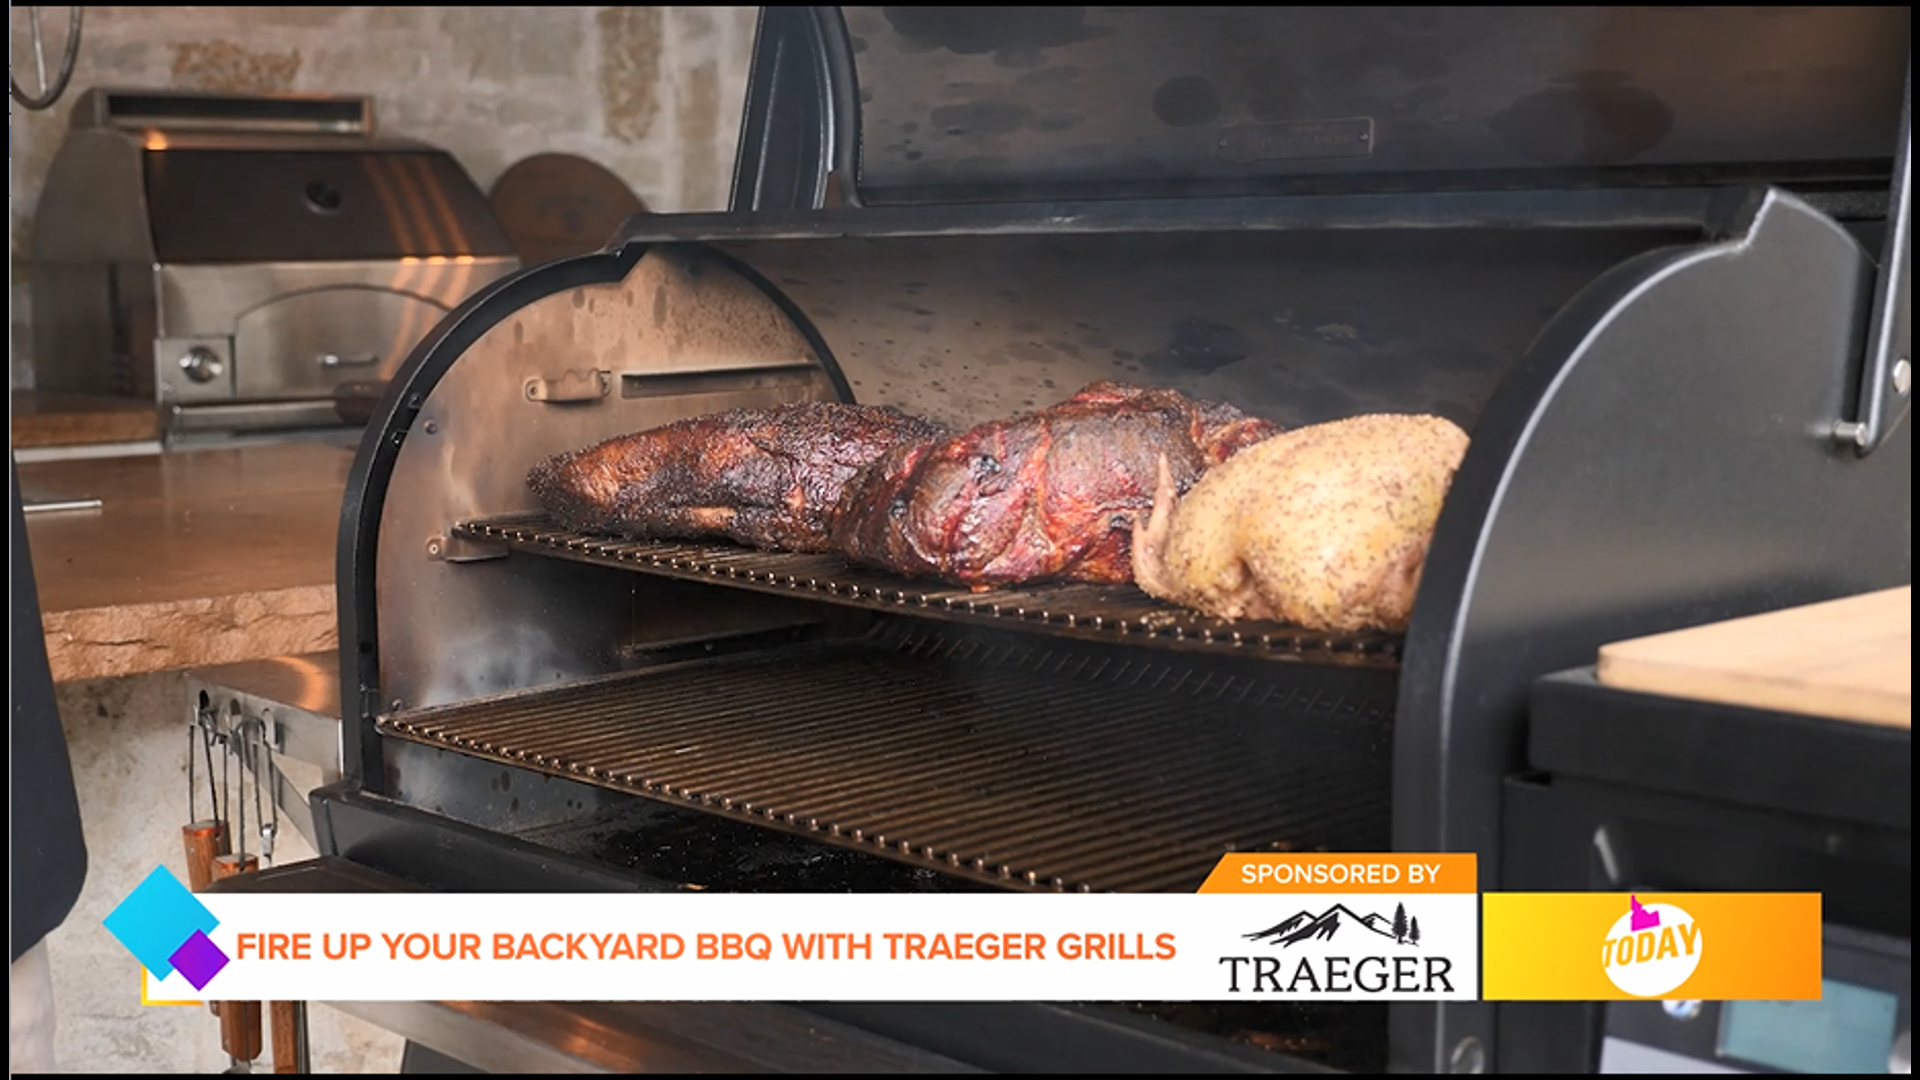 Sponsored by Traeger Grills - Matt Pittman with Meat Church BBQ gives us grilling tips on the Traeger to spice up your BBQ this summer!